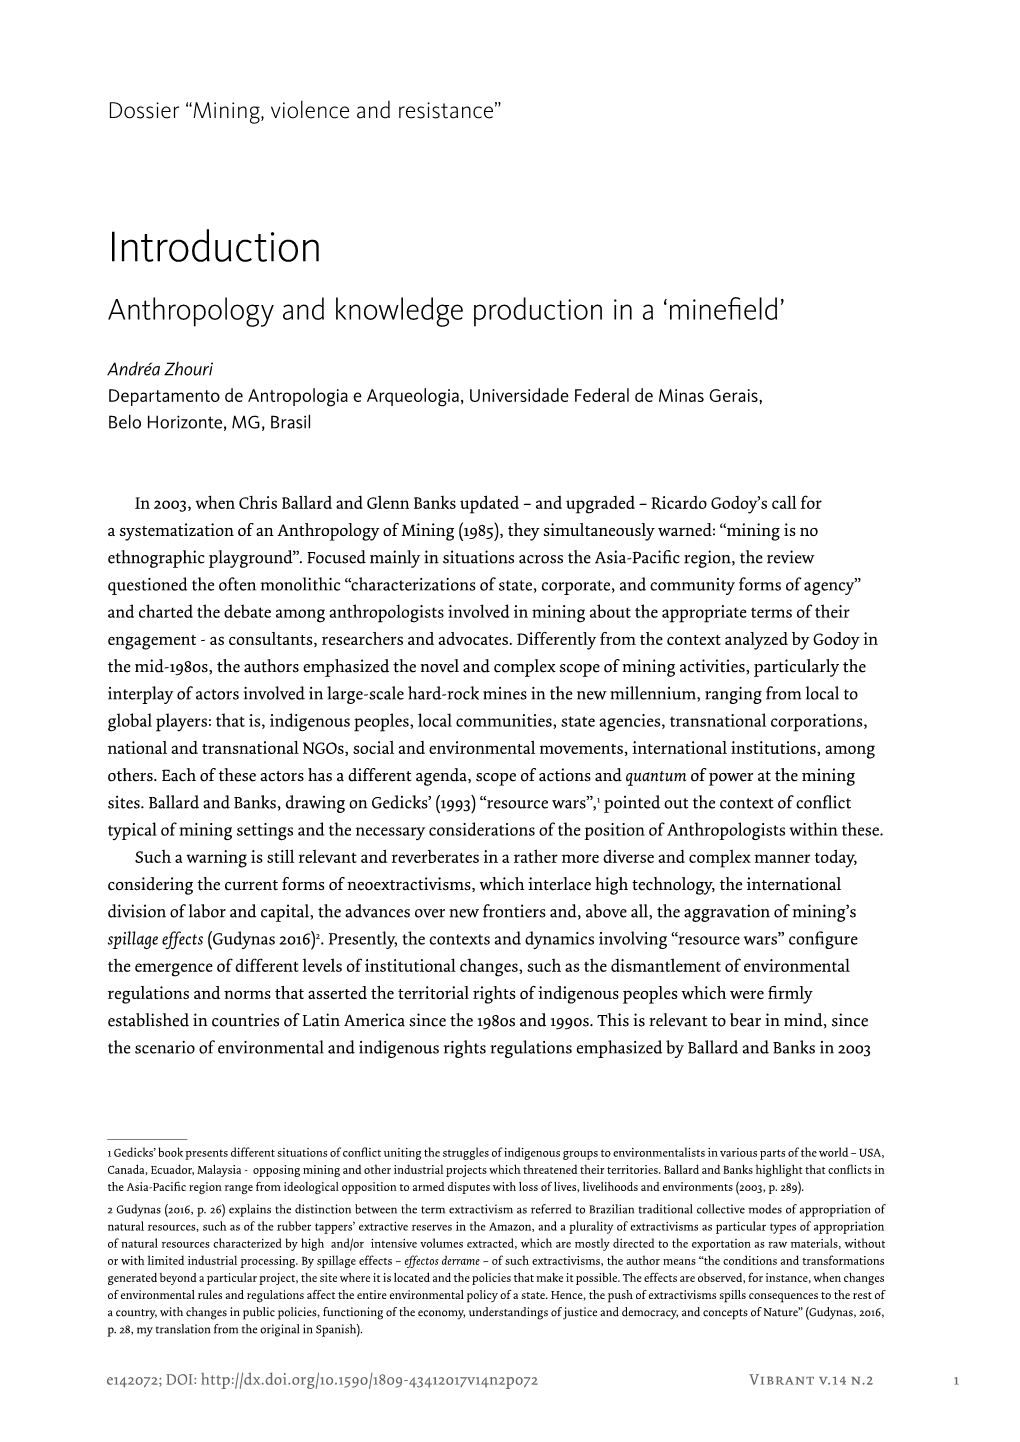 Introduction Anthropology and Knowledge Production in a ‘Minefield’